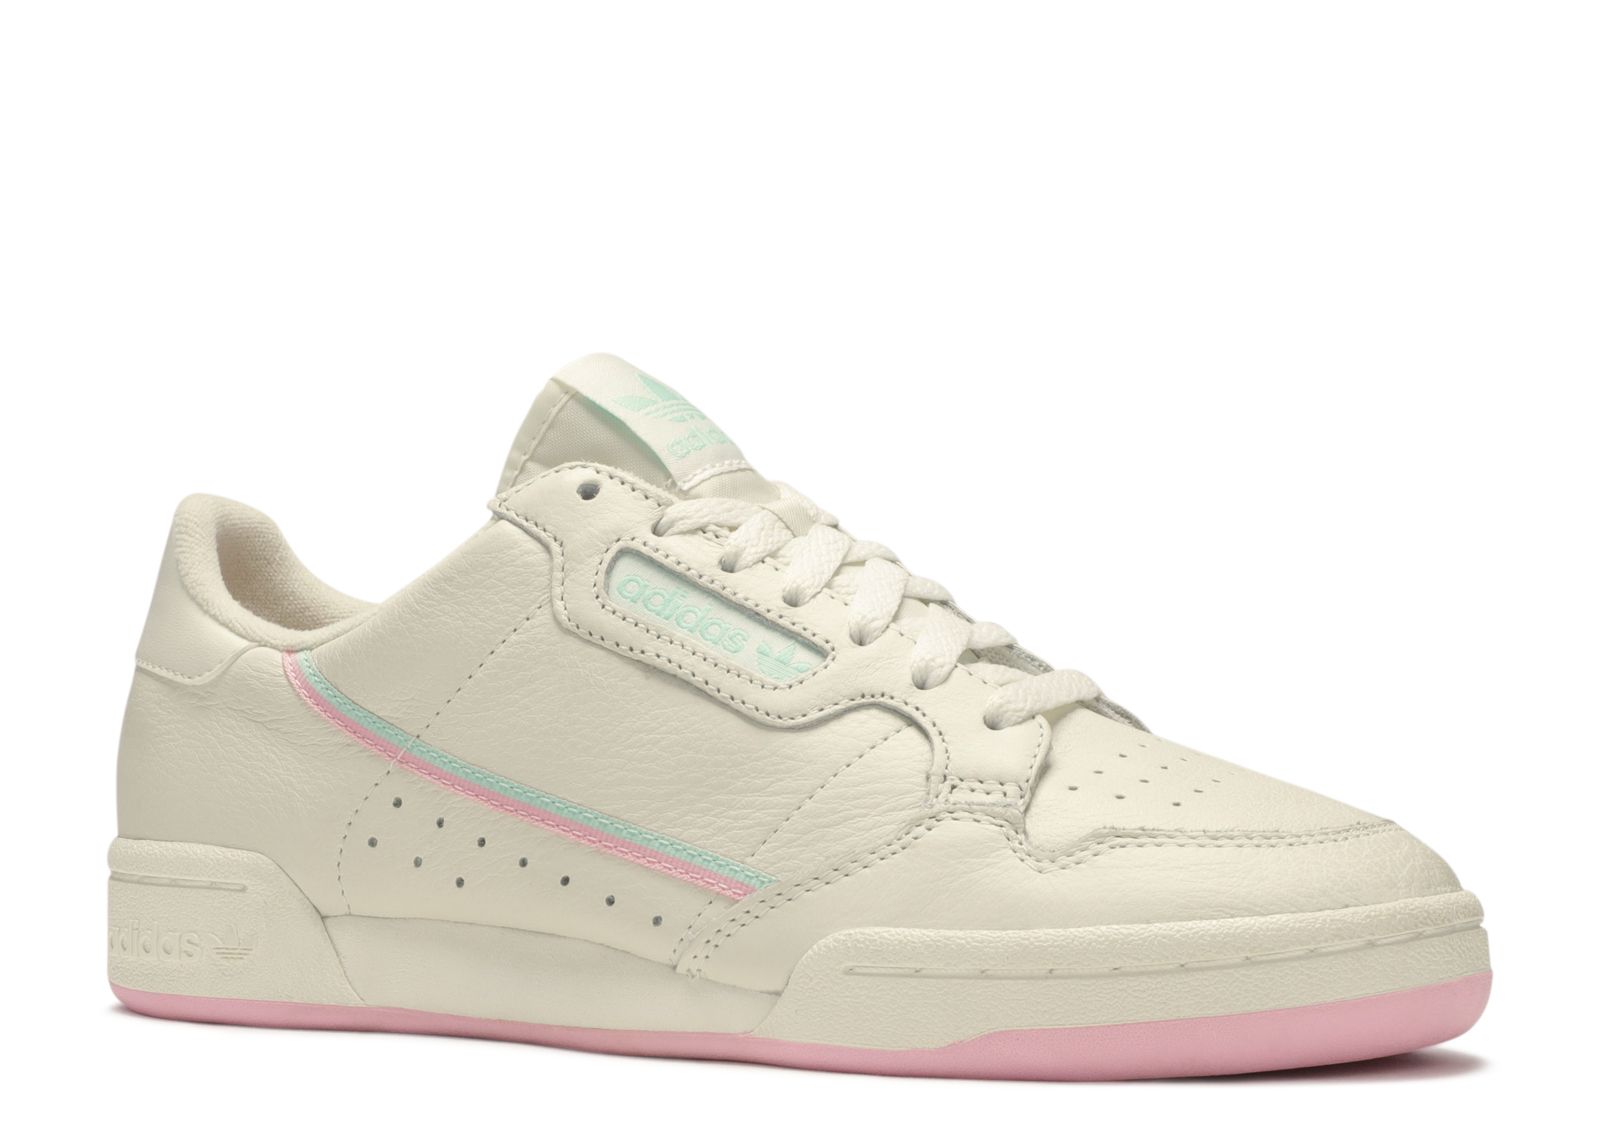 Earn Write a report Havoc Continental 80 'Off White Pink' - Adidas - BD7645 - off white/true  pink/clear mint | Flight Club